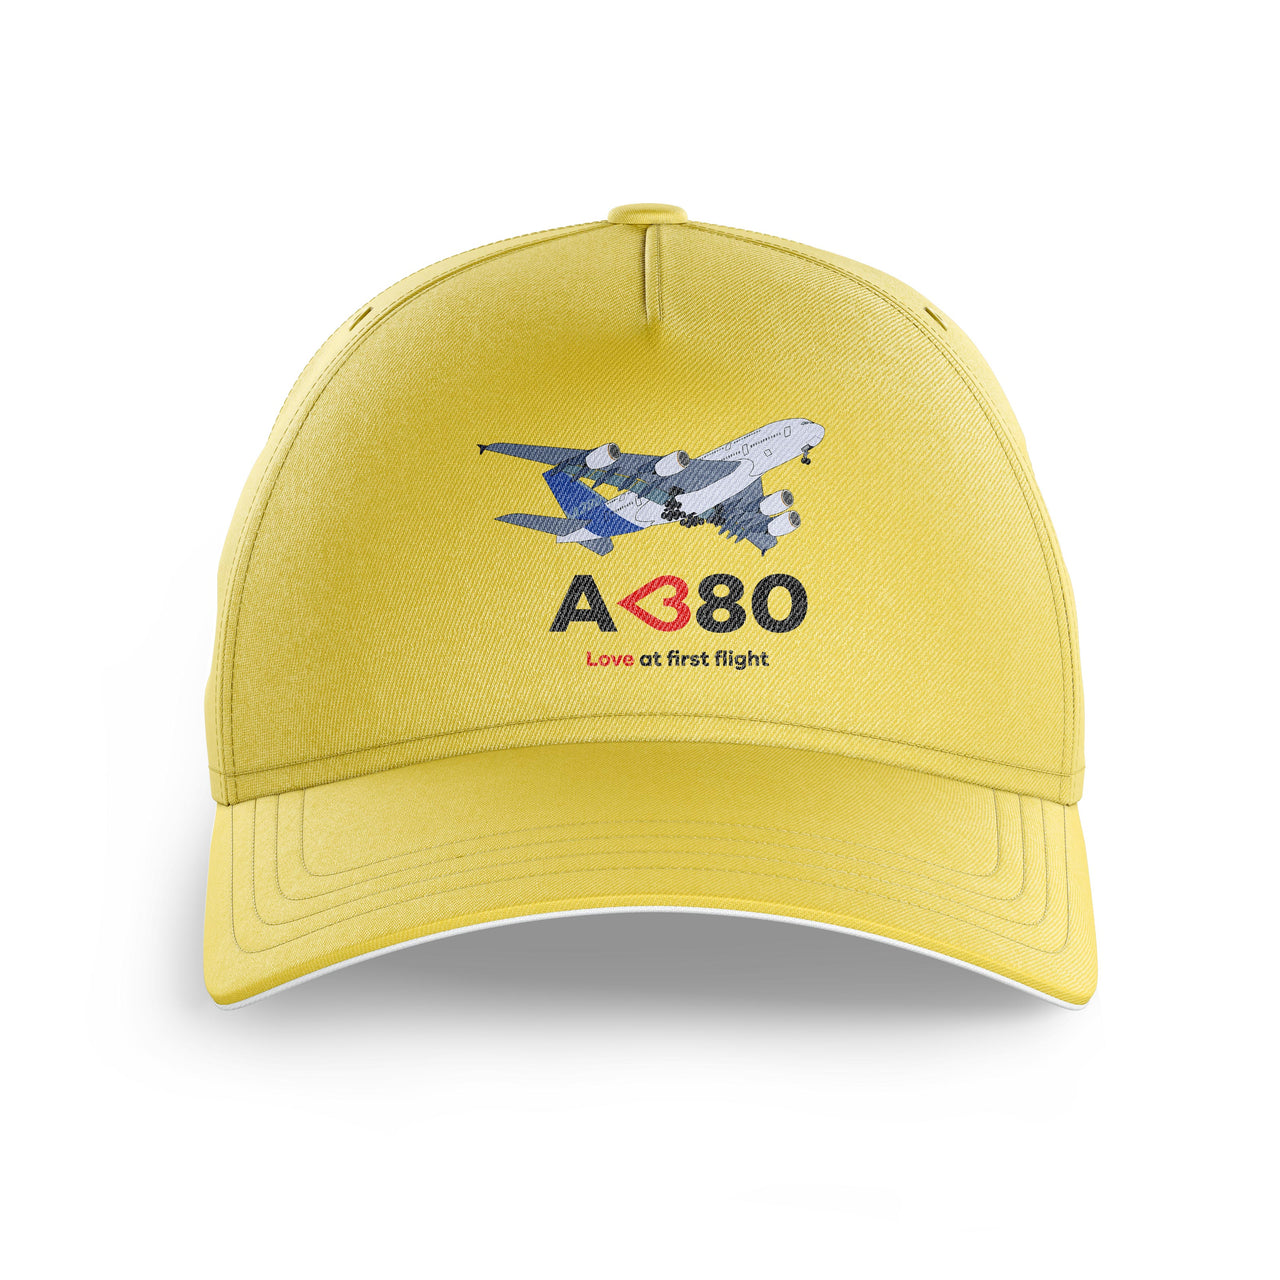 Airbus A380 Love at first flight Printed Hats